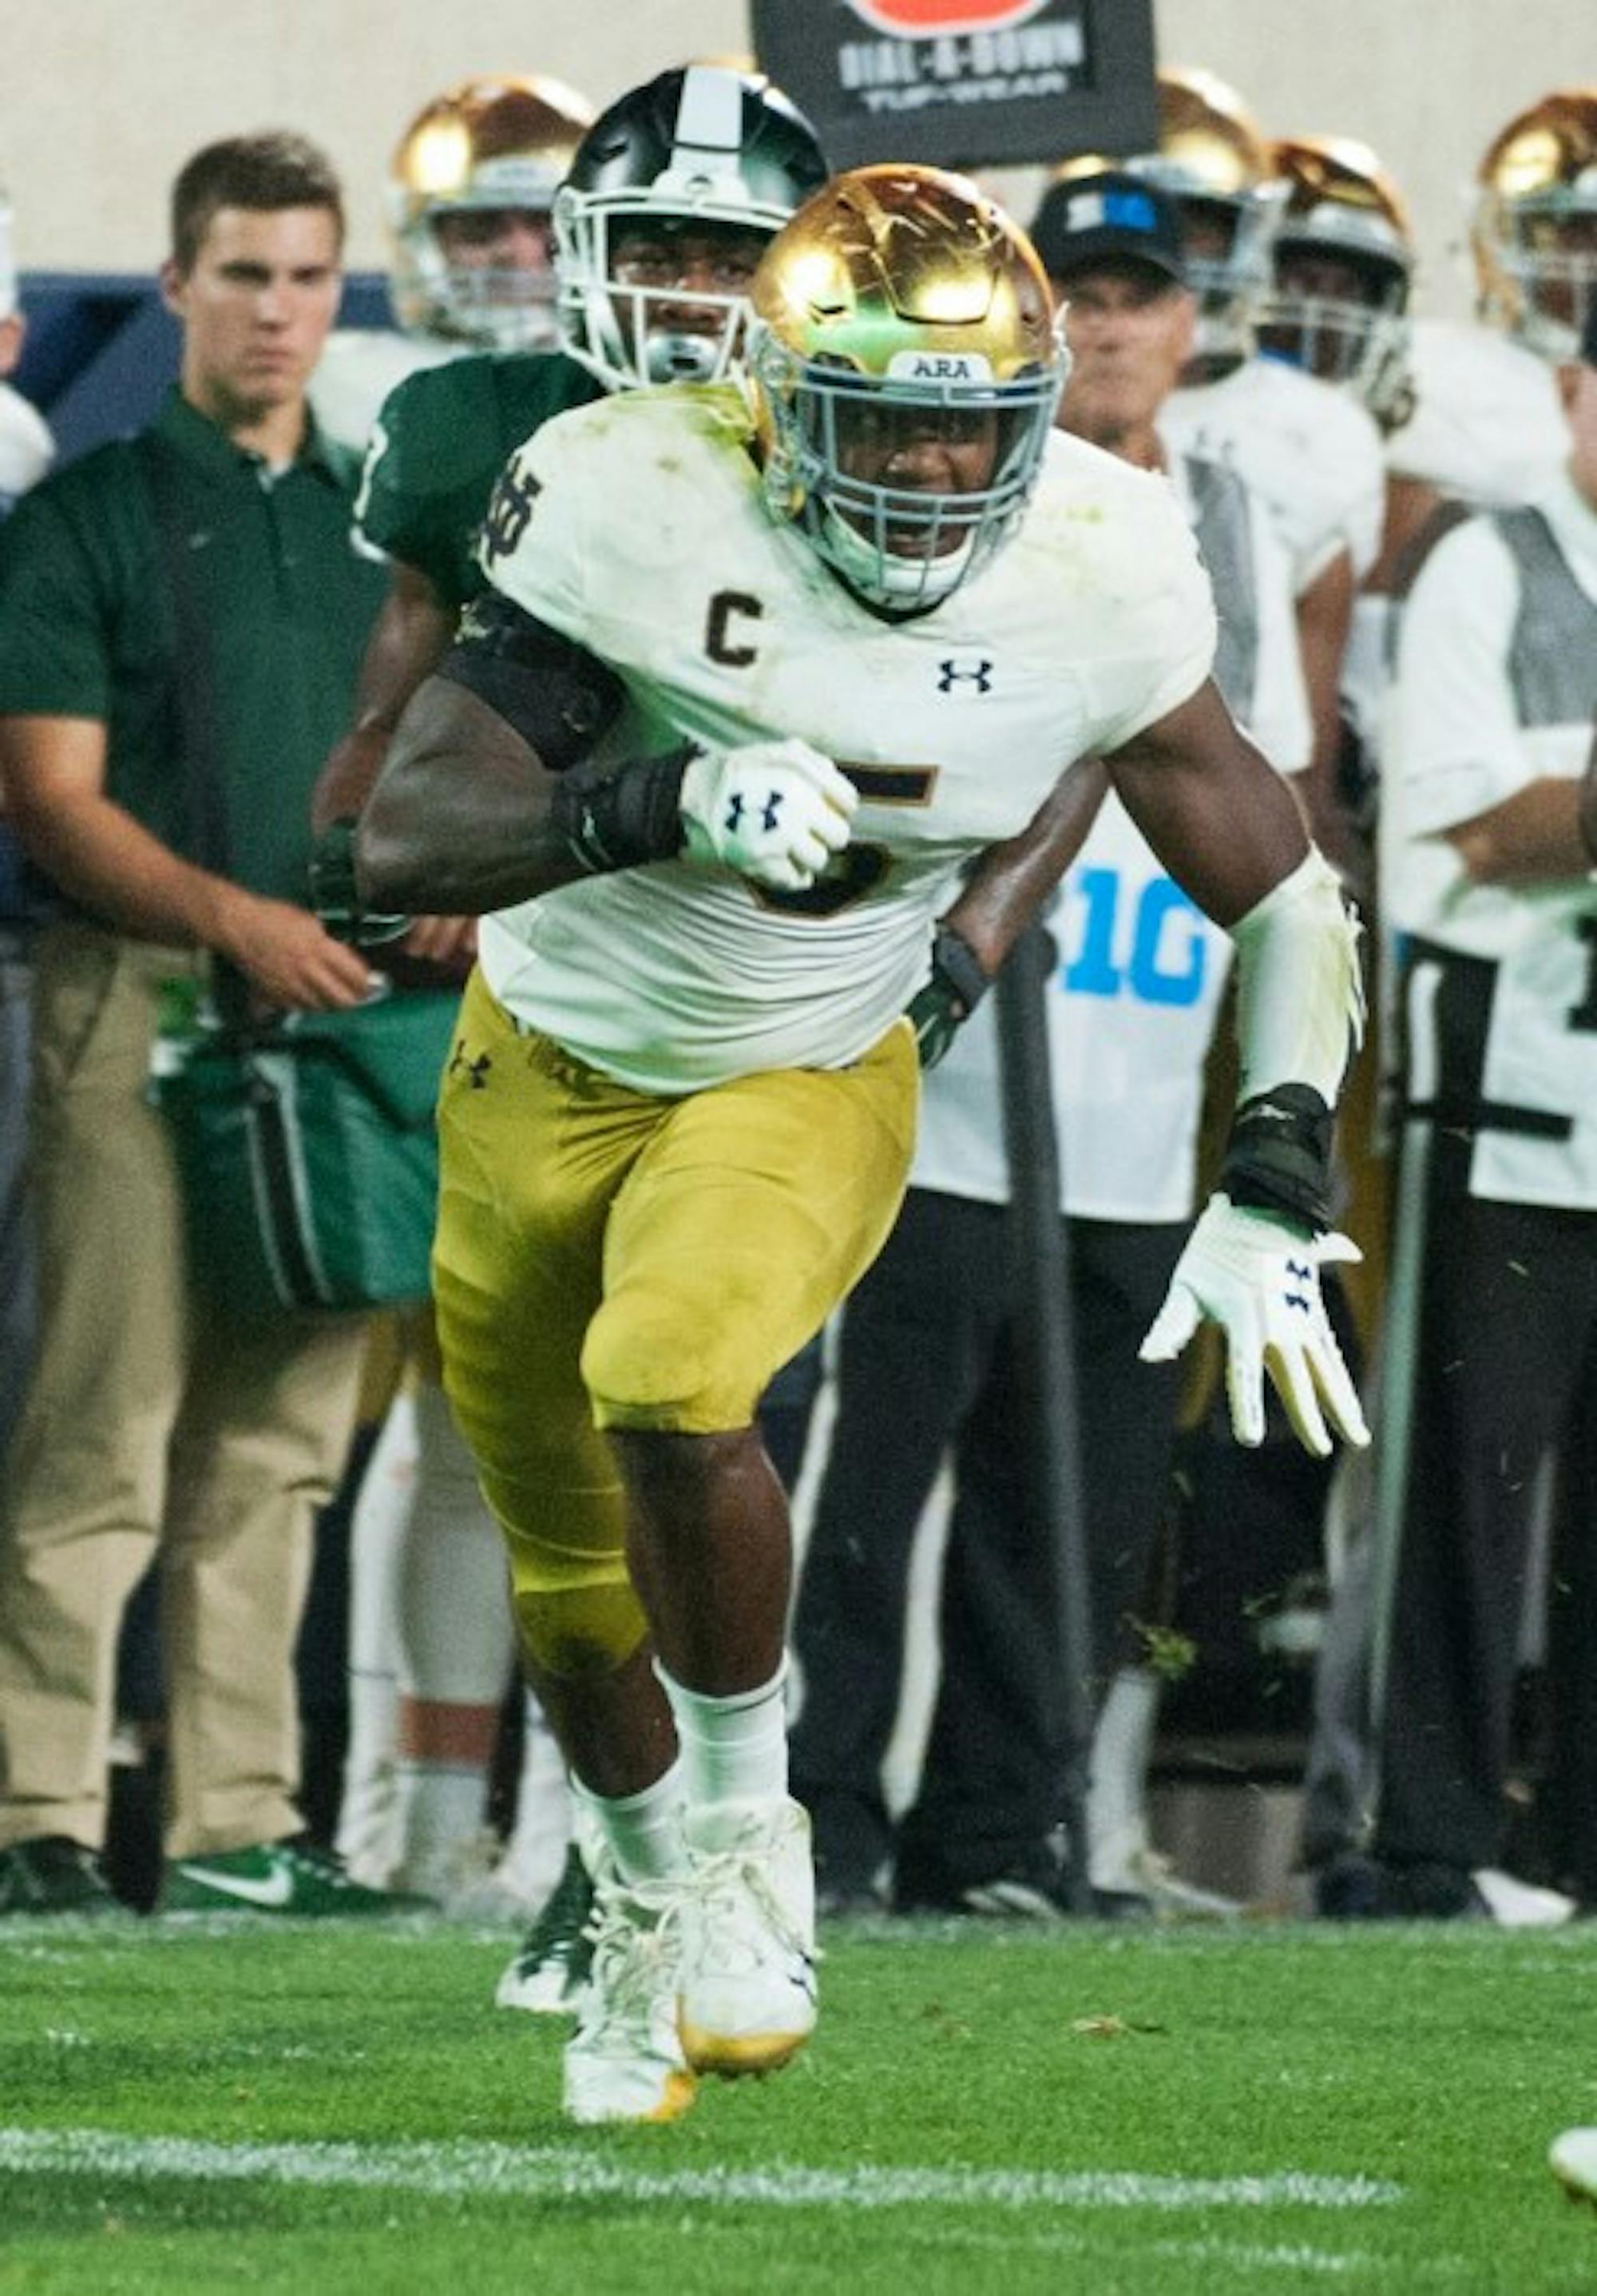 Irish captain and senior linebacker Nyles Morgan chases an opponent during Notre Dame's 38-18 victory over Michigan State on Sept. 23 at Spartan Stadium.